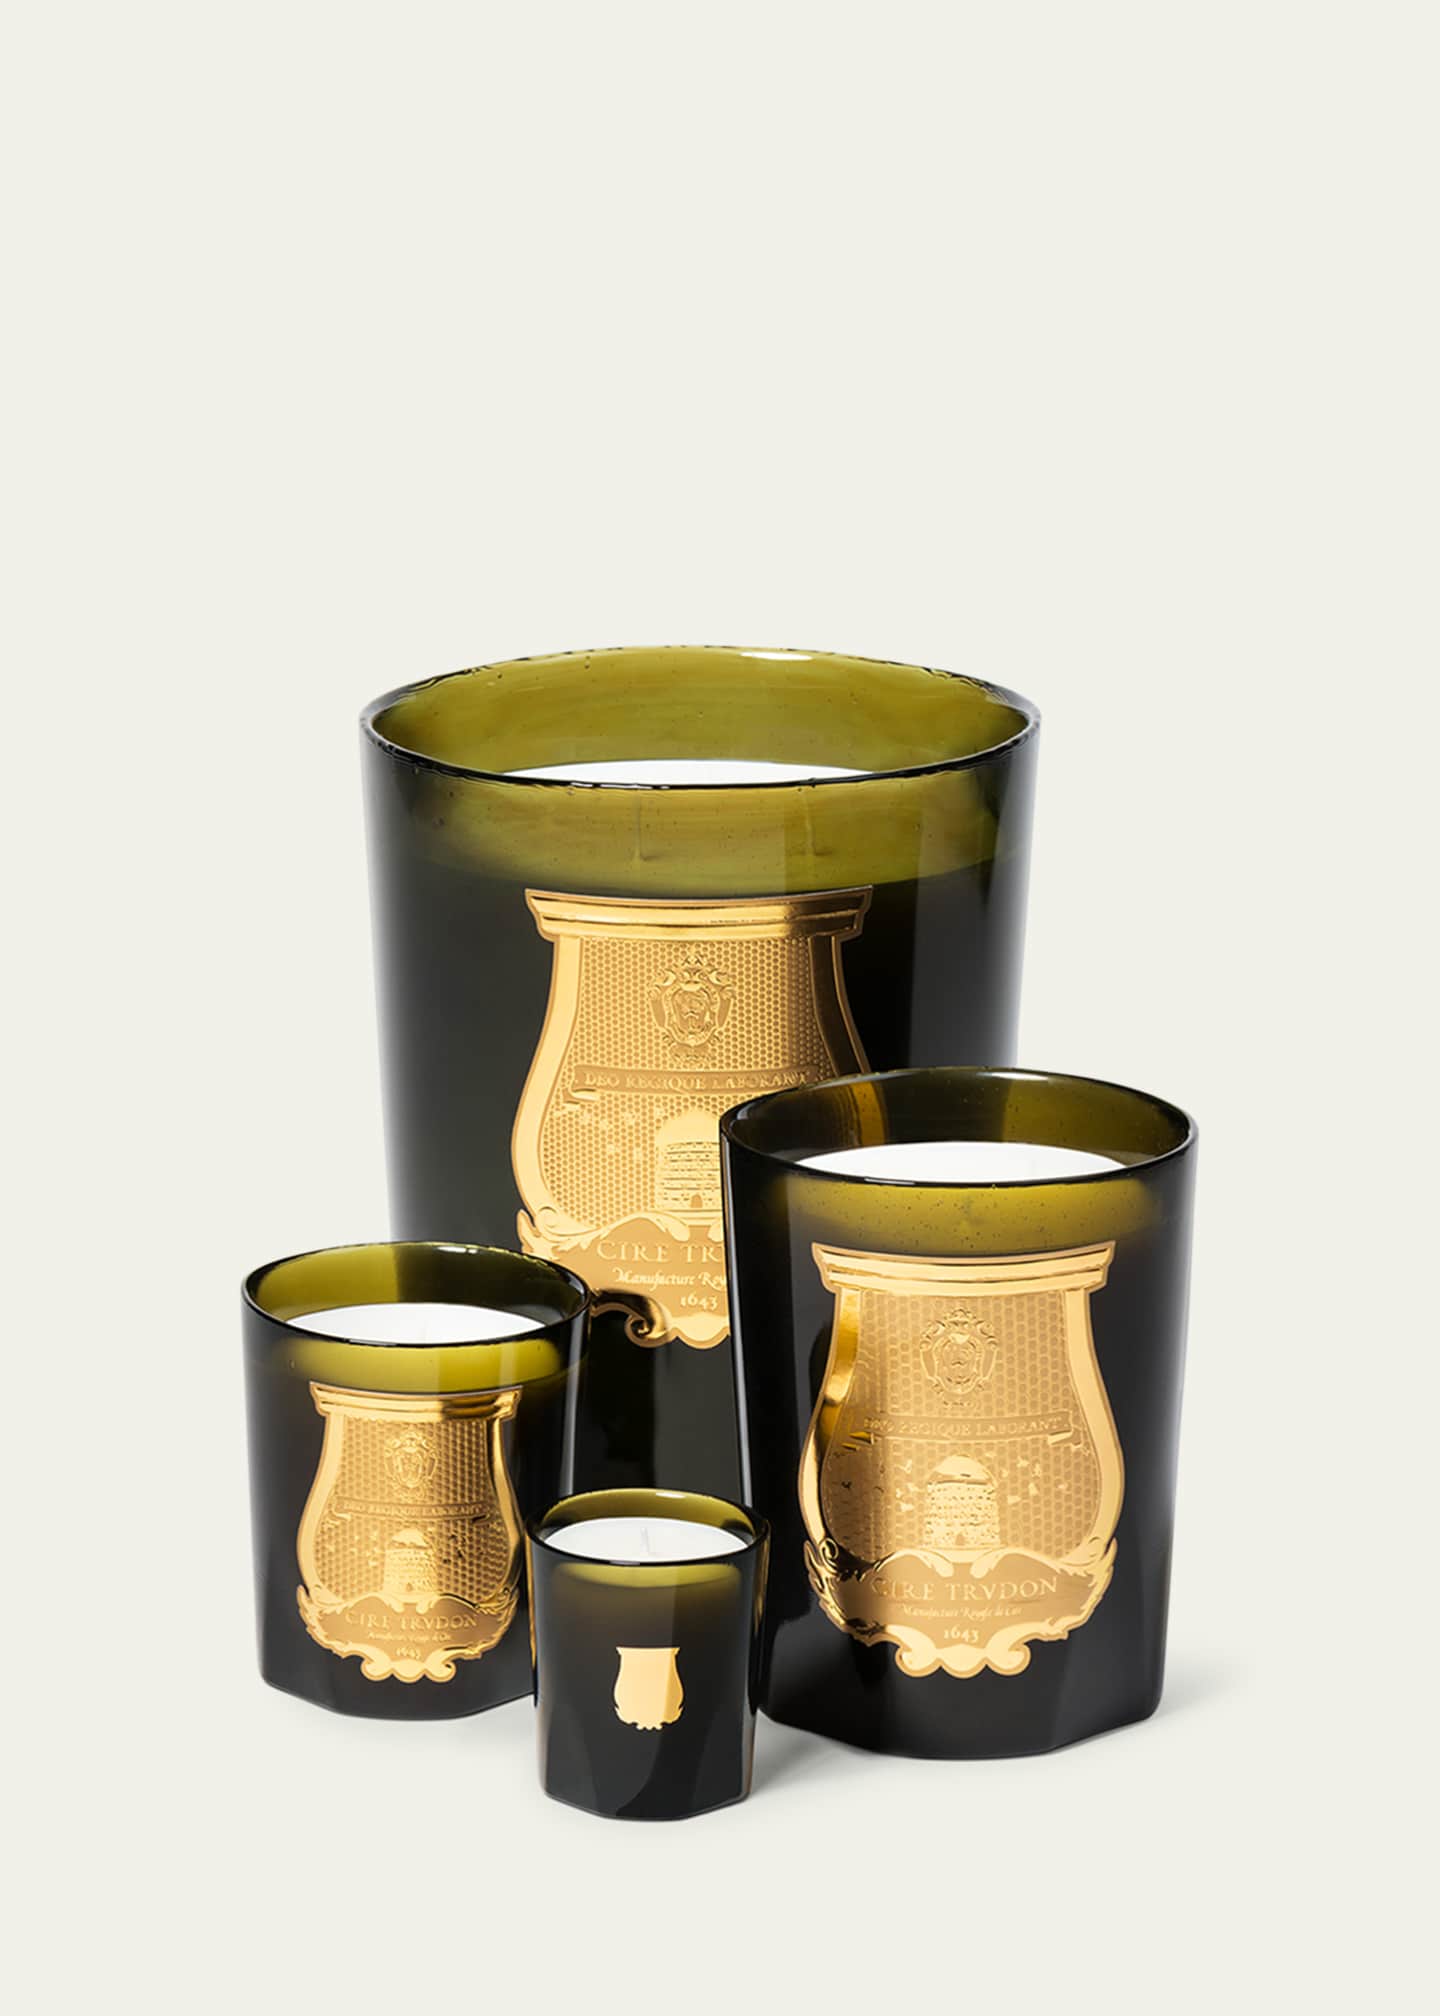 Trudon Ernesto Petit Candle, Leather And Tobacco - Bergdorf Goodman